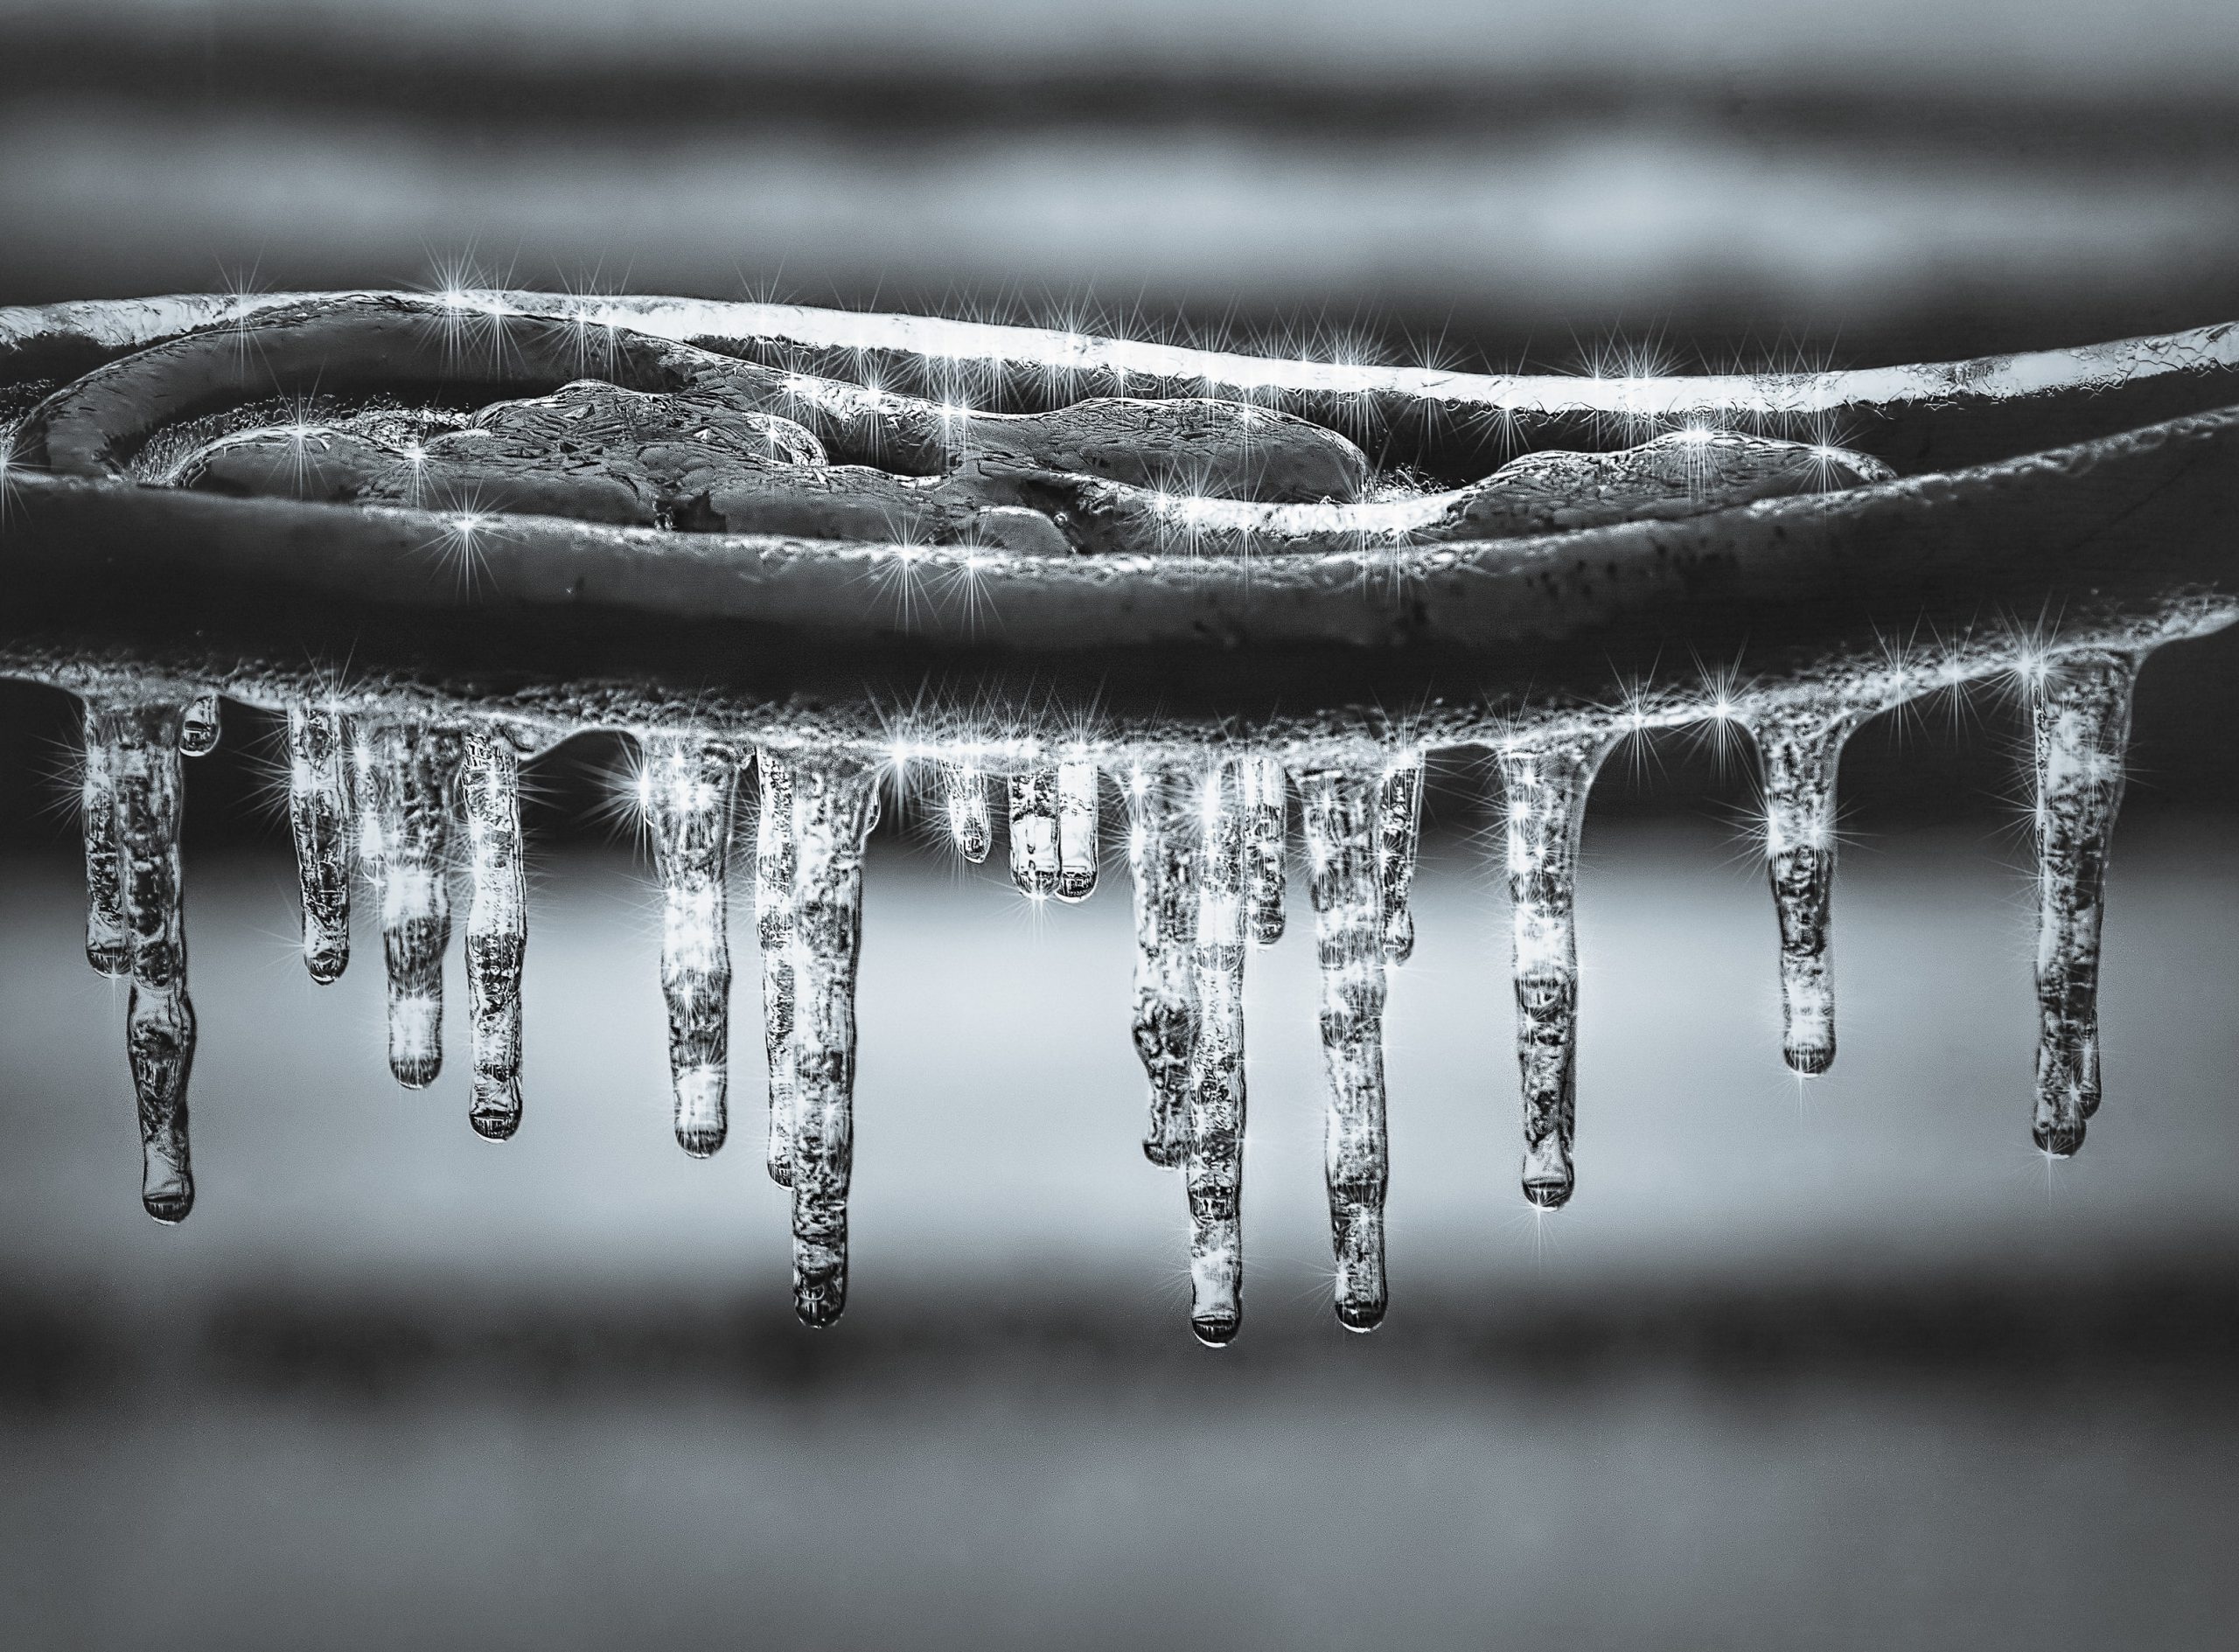 Icicles form on cast iron